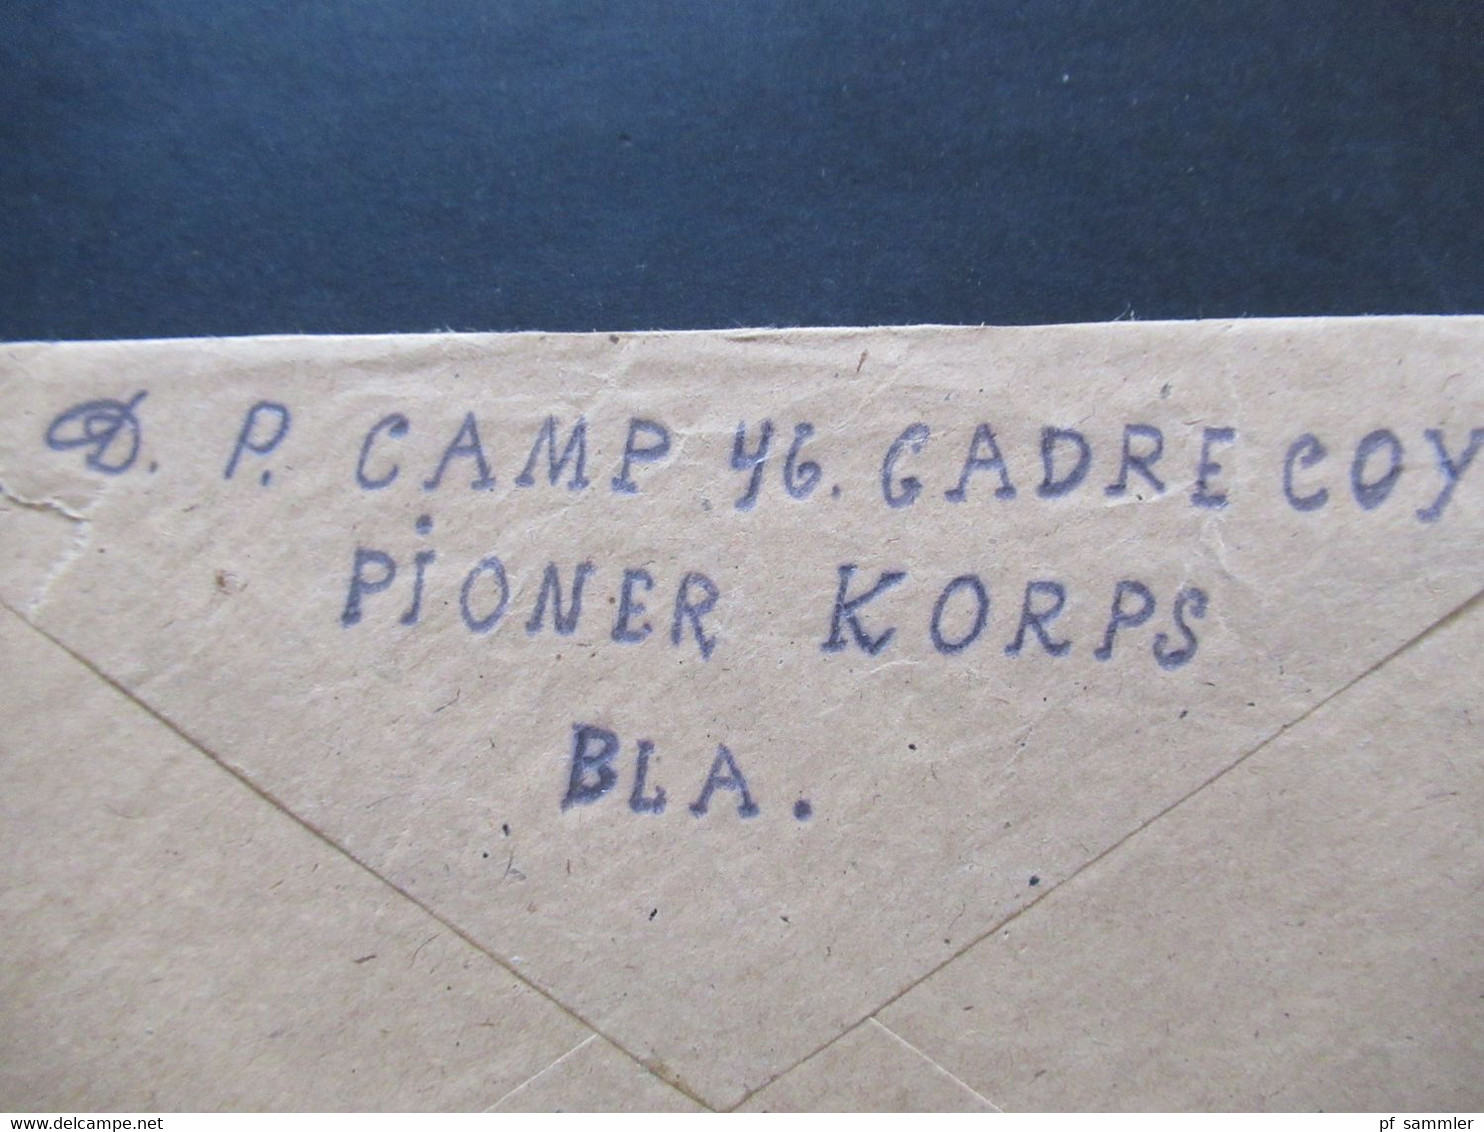 19. Mai 1945 Polish Forces Absender Displaced Persons Camp 46 Gadre Coy Pioner Korps Bla. An: Polish Red Cross London - Covers & Documents